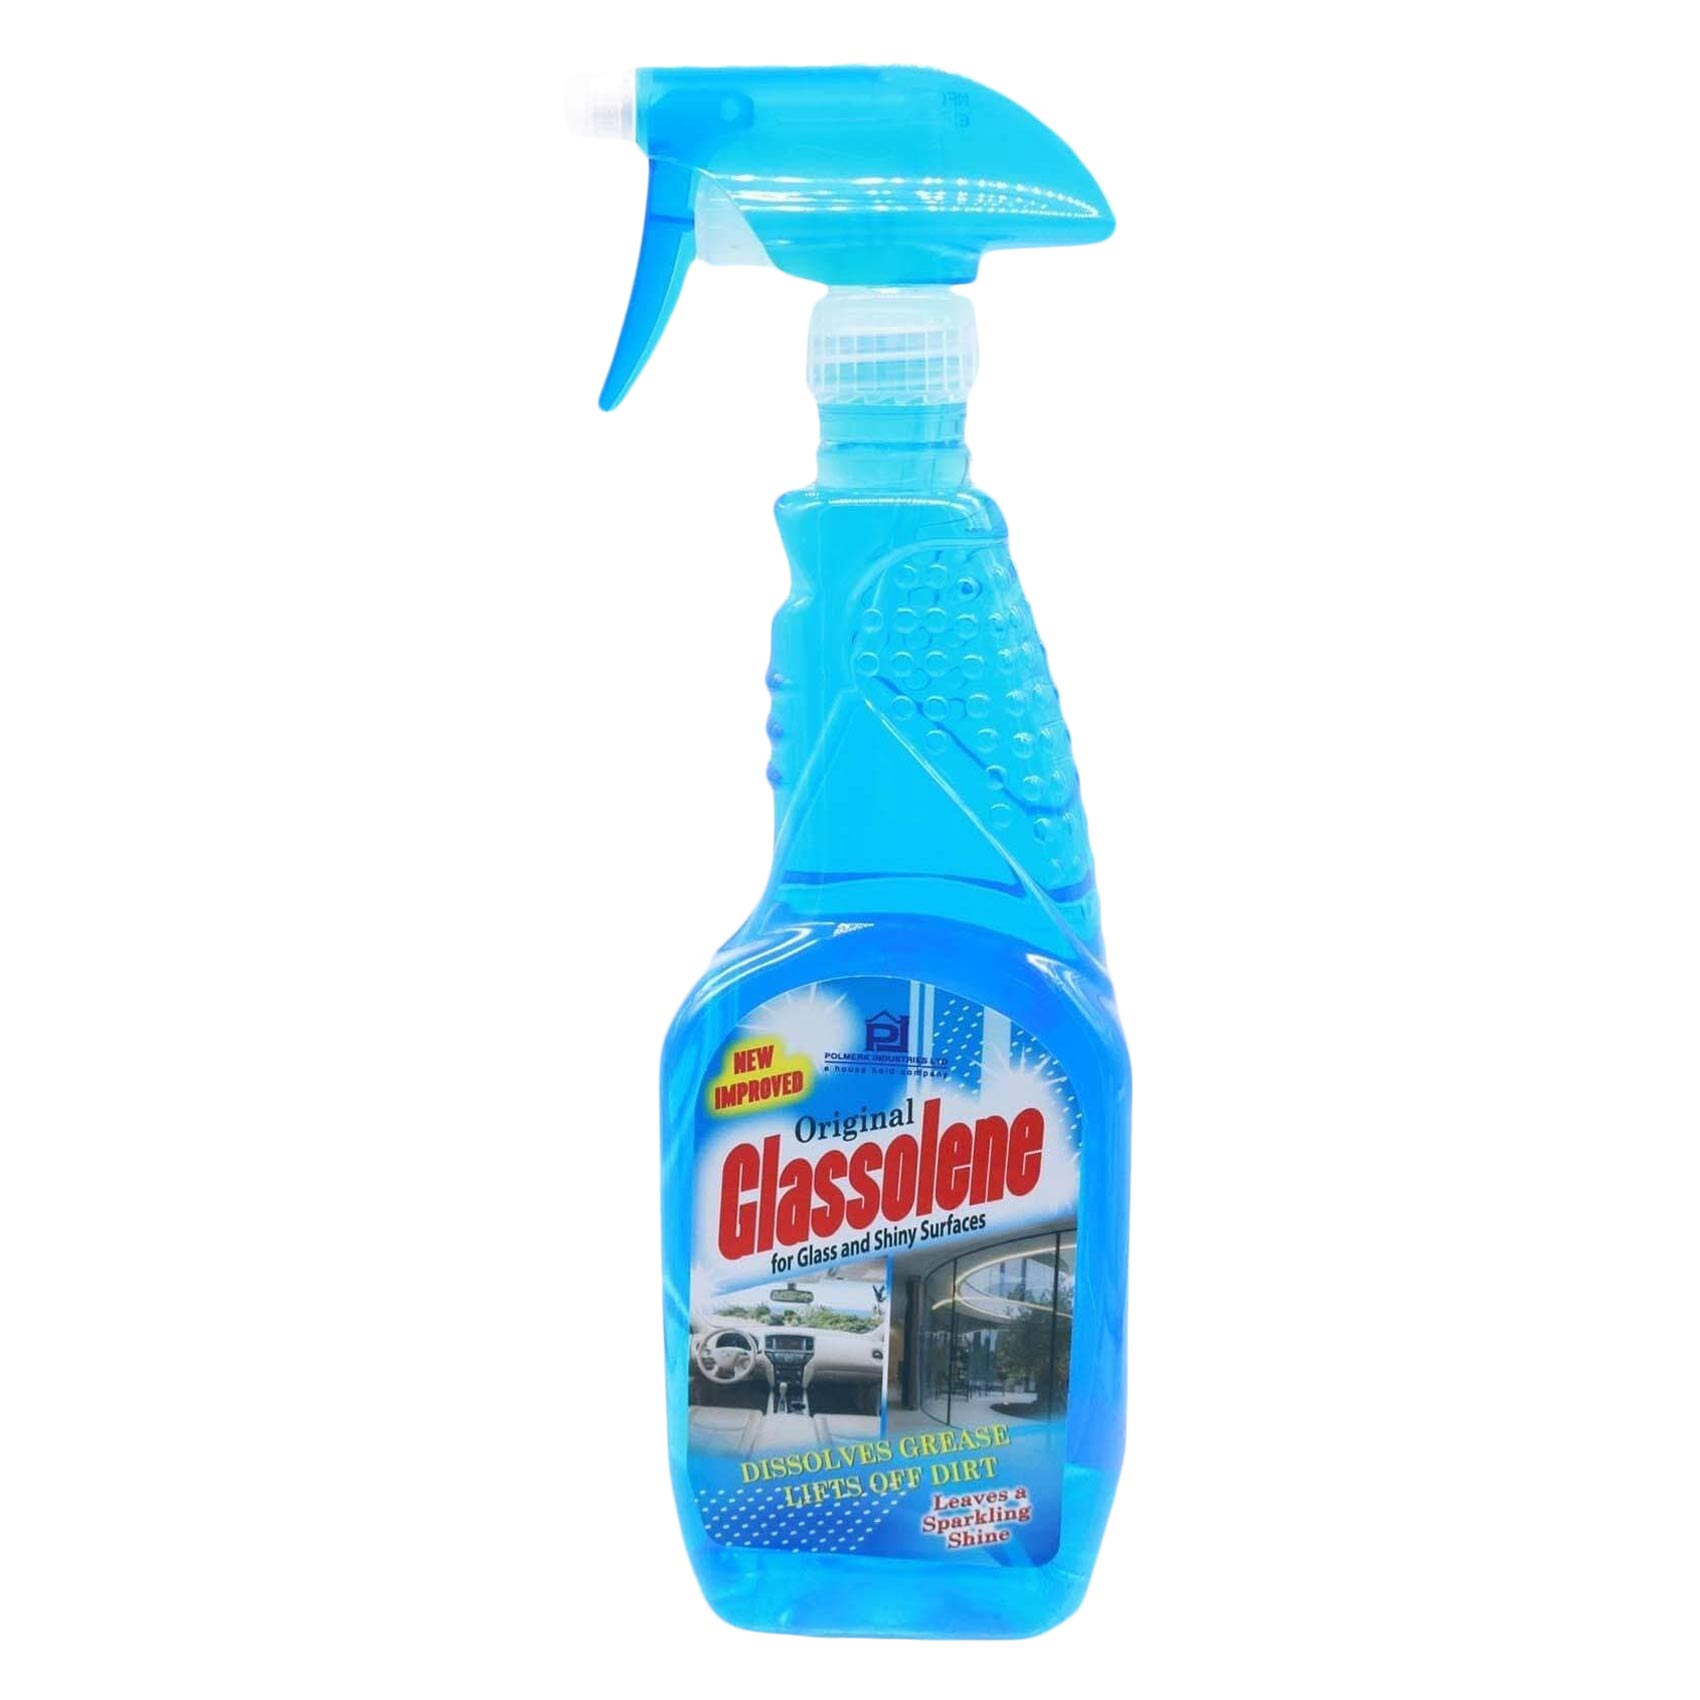 Glassolene Original Glass And Shiny Surfaces Cleaner 750ml